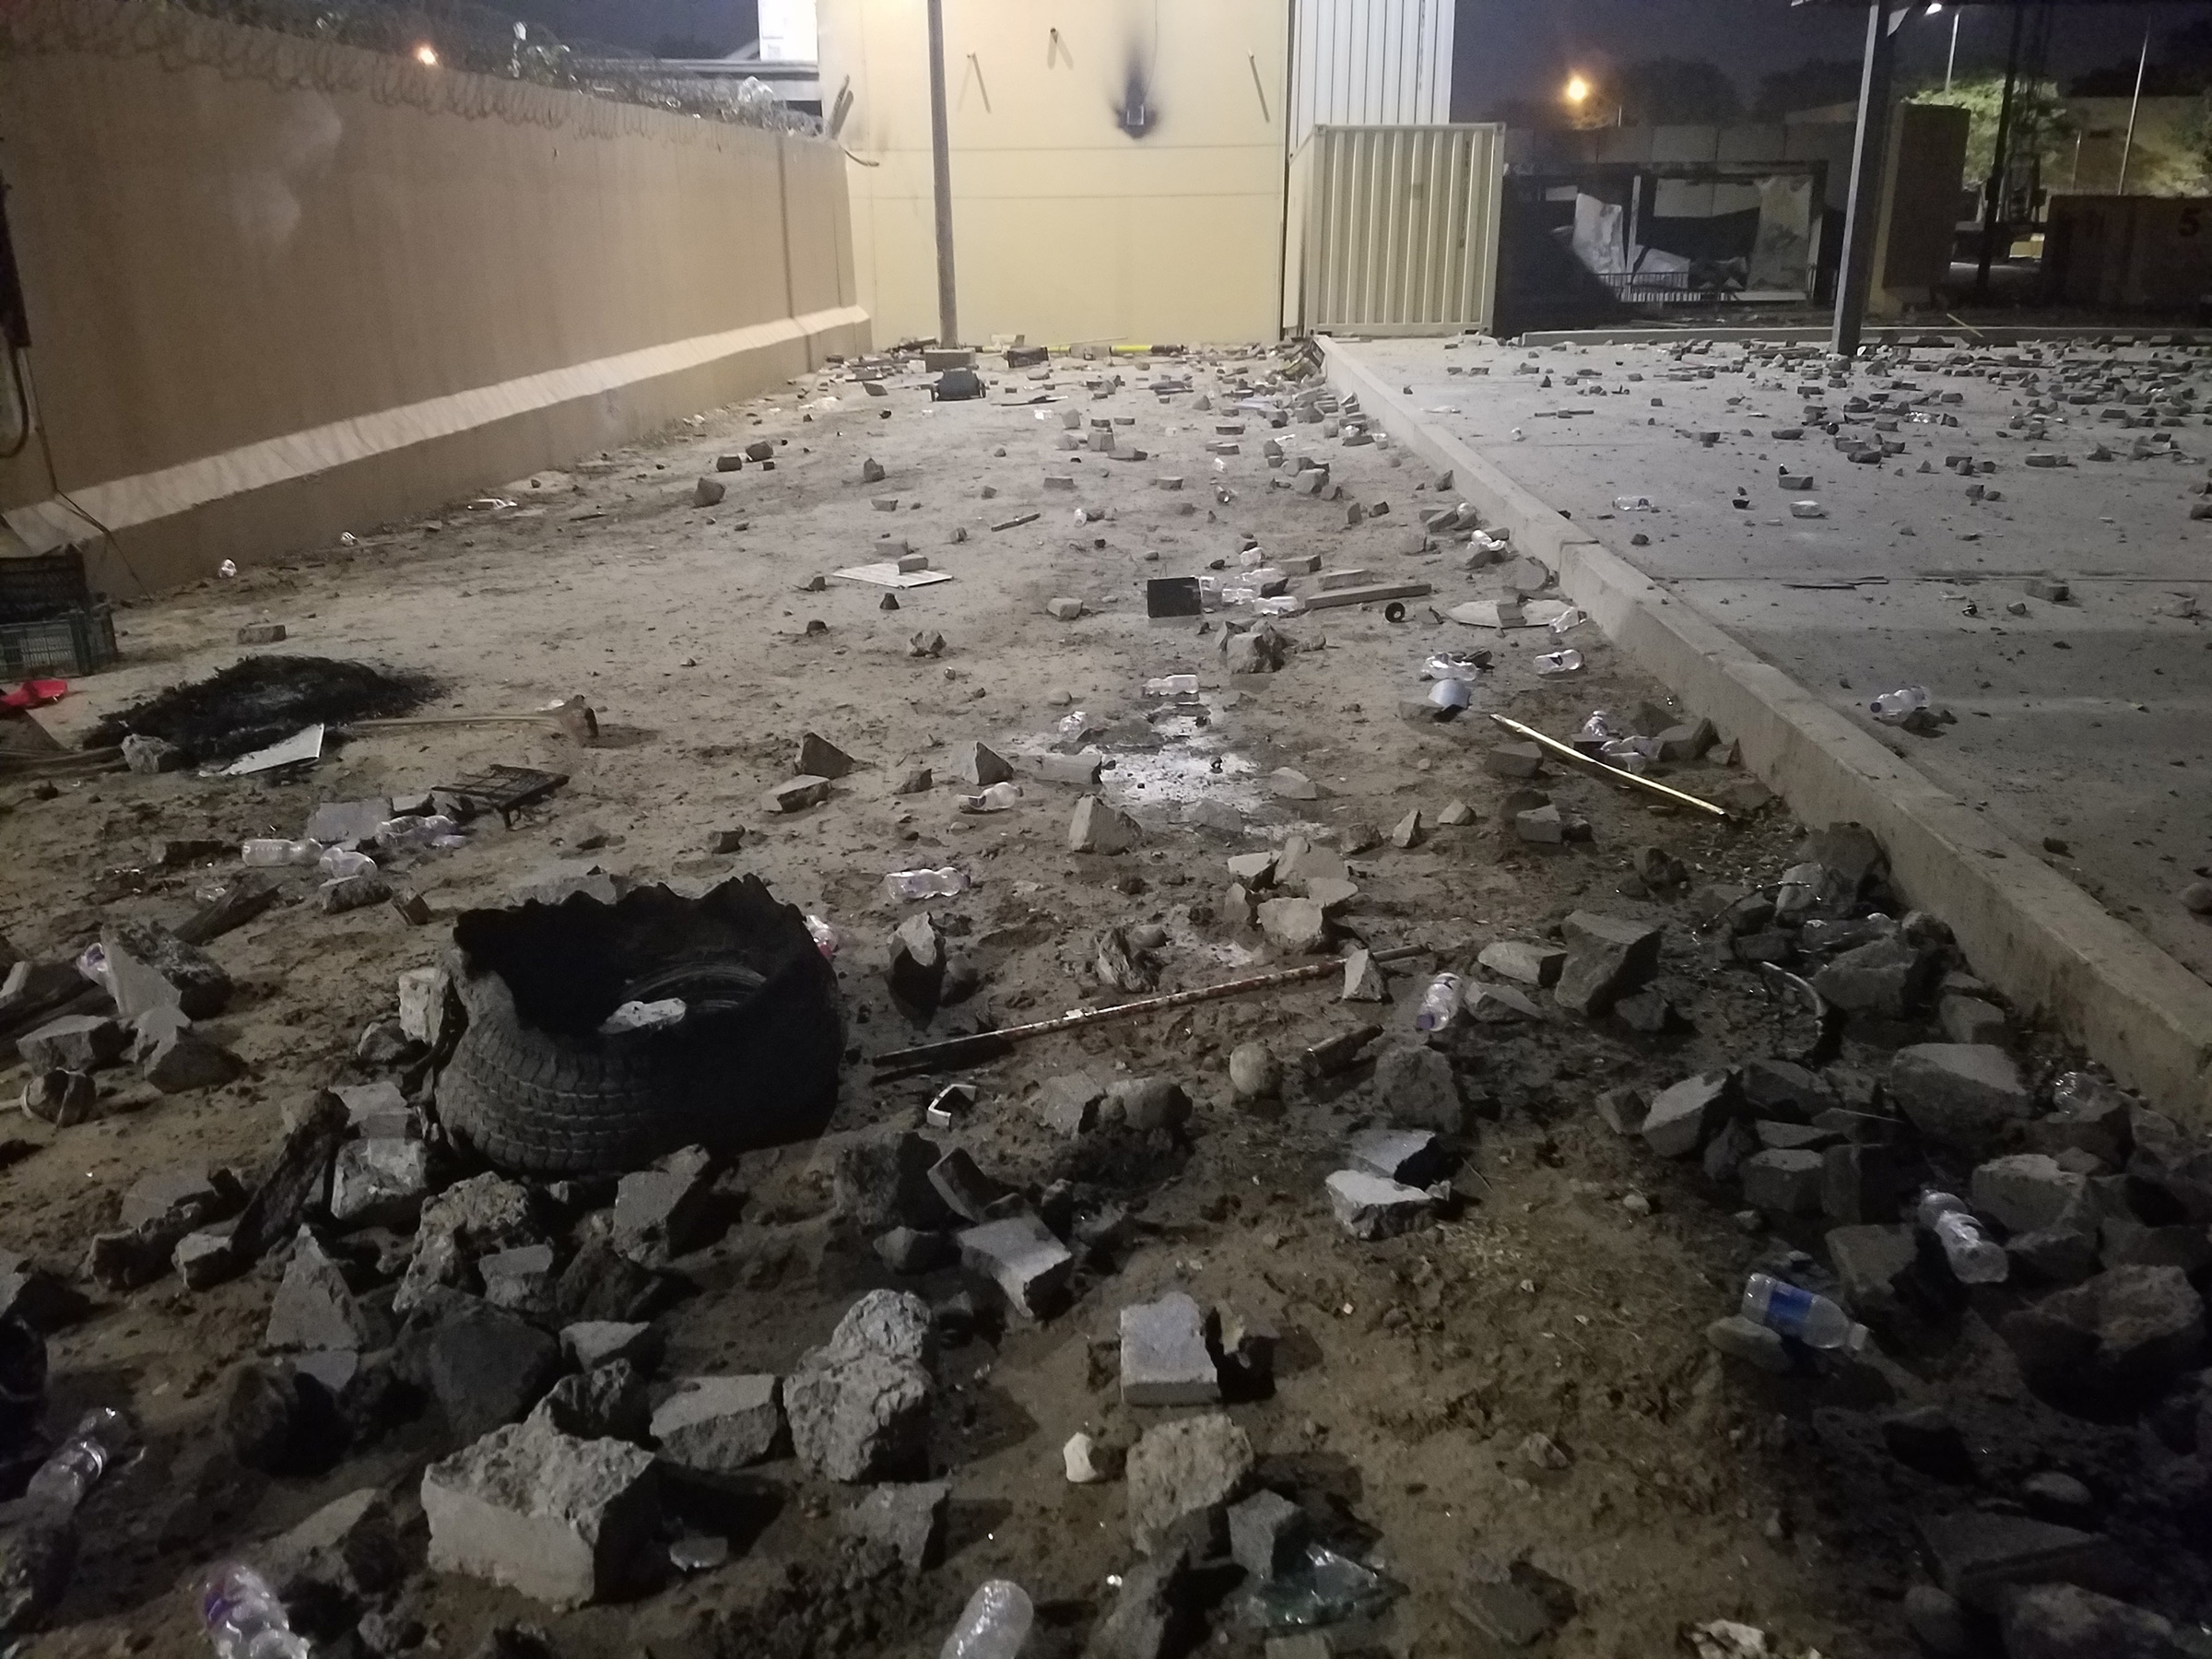 Debris and burned items in the aftermath of an attack on the U.S. embassy in Baghdad on Dec. 31, 2019.